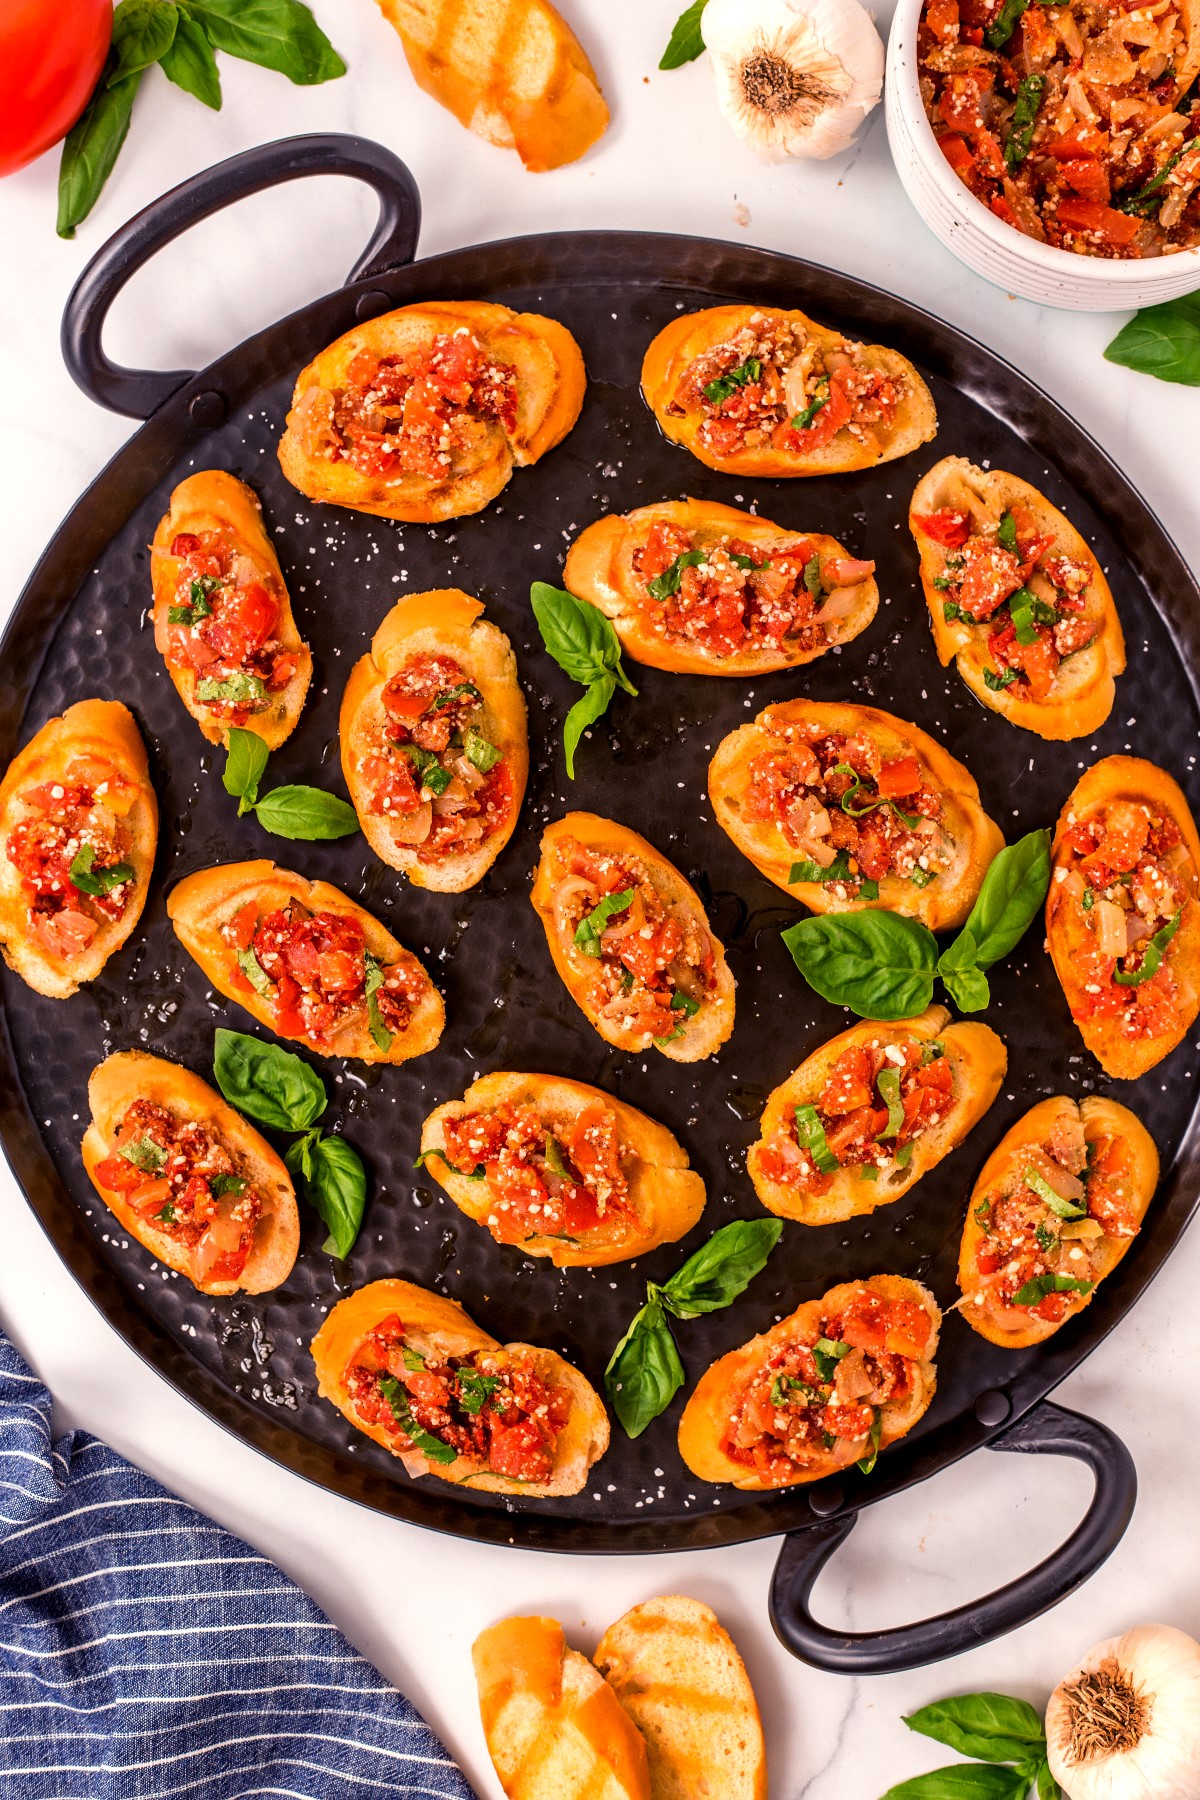 Bruschetta served on a round metal tray with fresh basil leaves as garnish